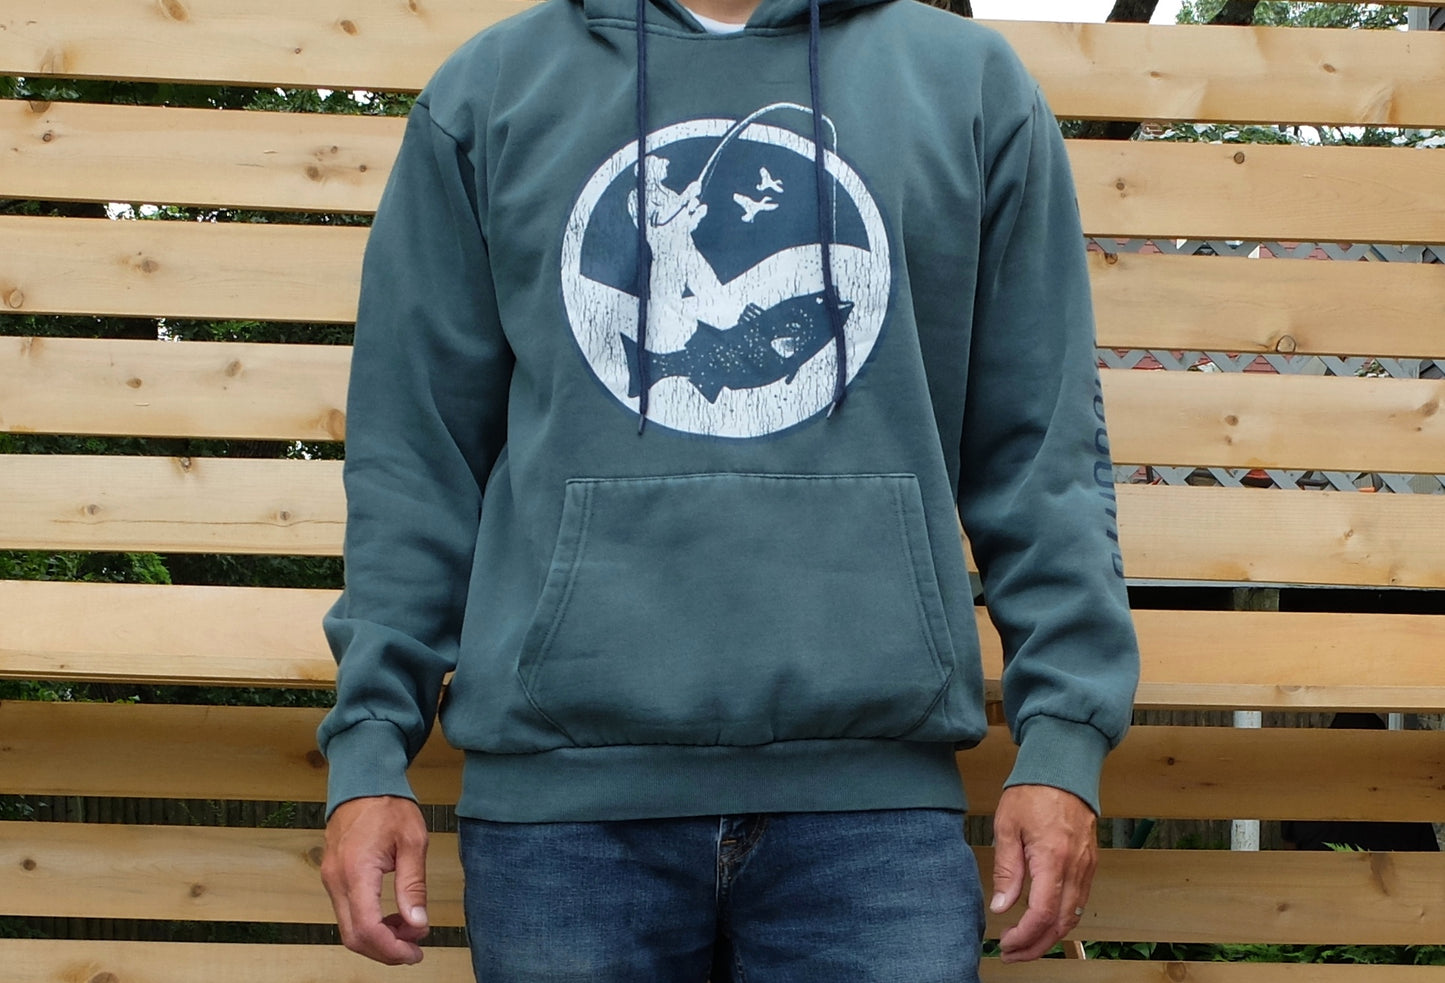 man wearing washed blue-green hoodie with round white and navy blue surf fisherman logo